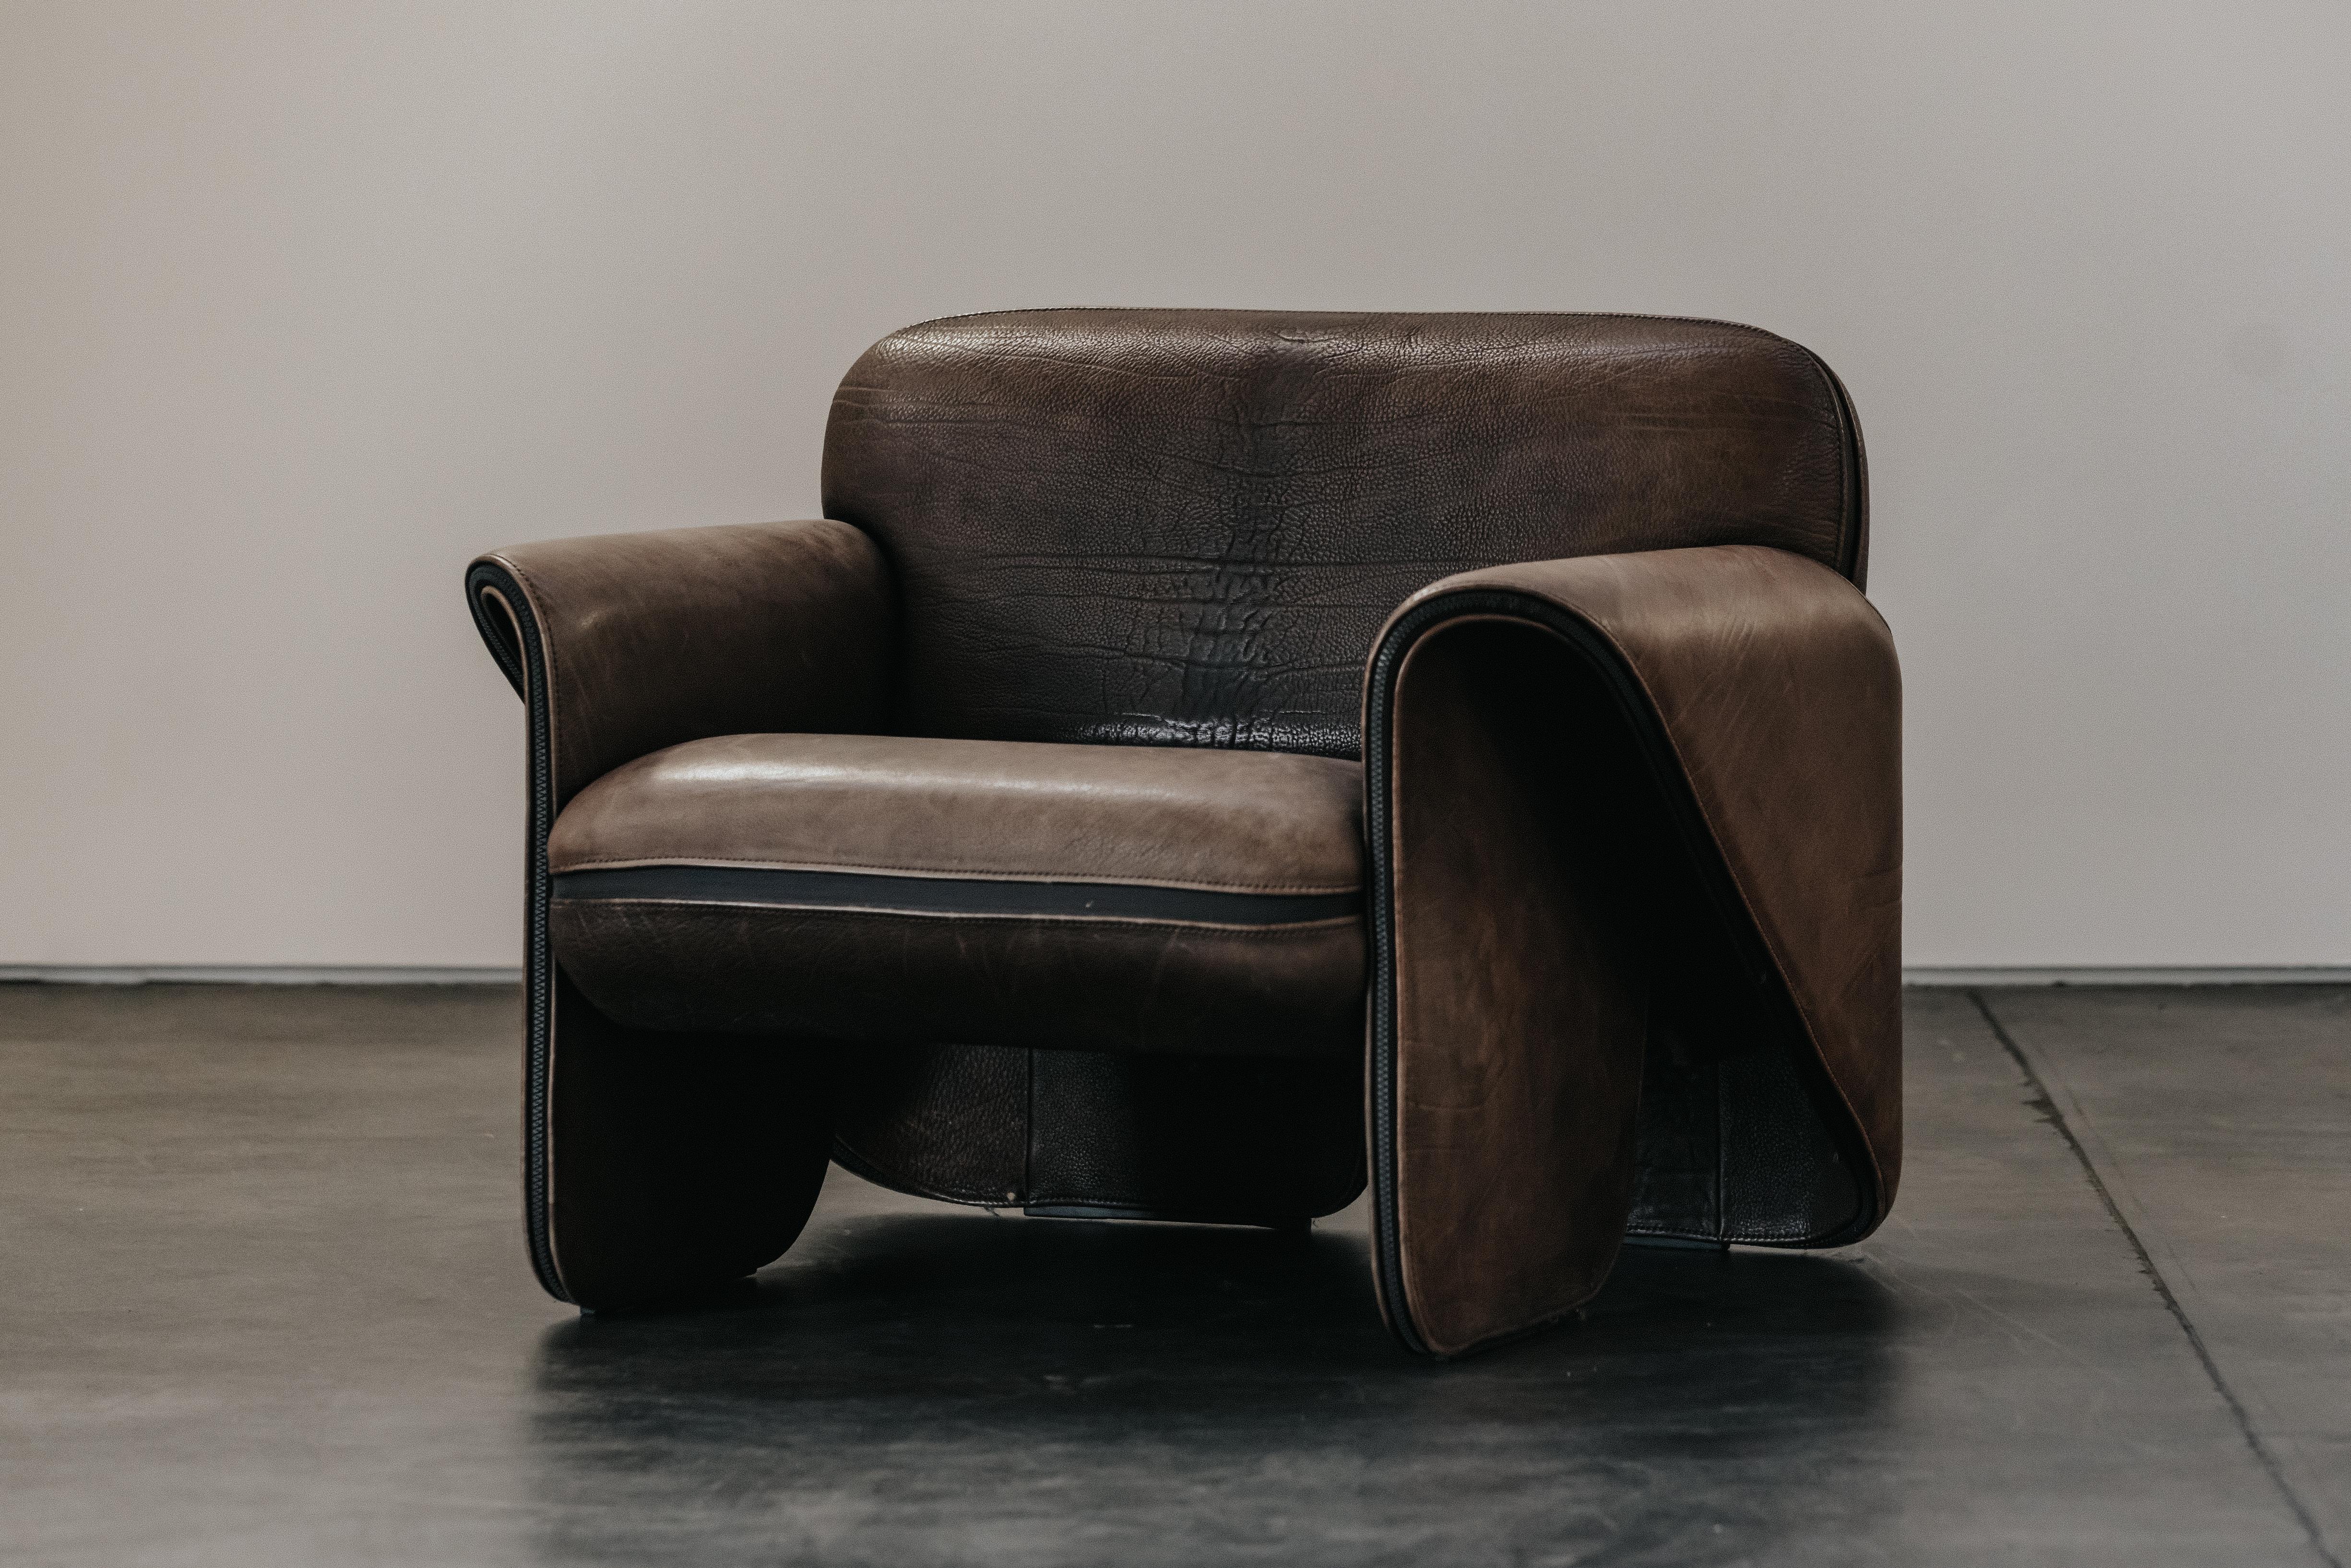 Vintage Brown Leather De Sede DS125 Lounge Chair From Switzerland, Circa 1970.  Original brown leather upholstery with fantastic patina and wear.